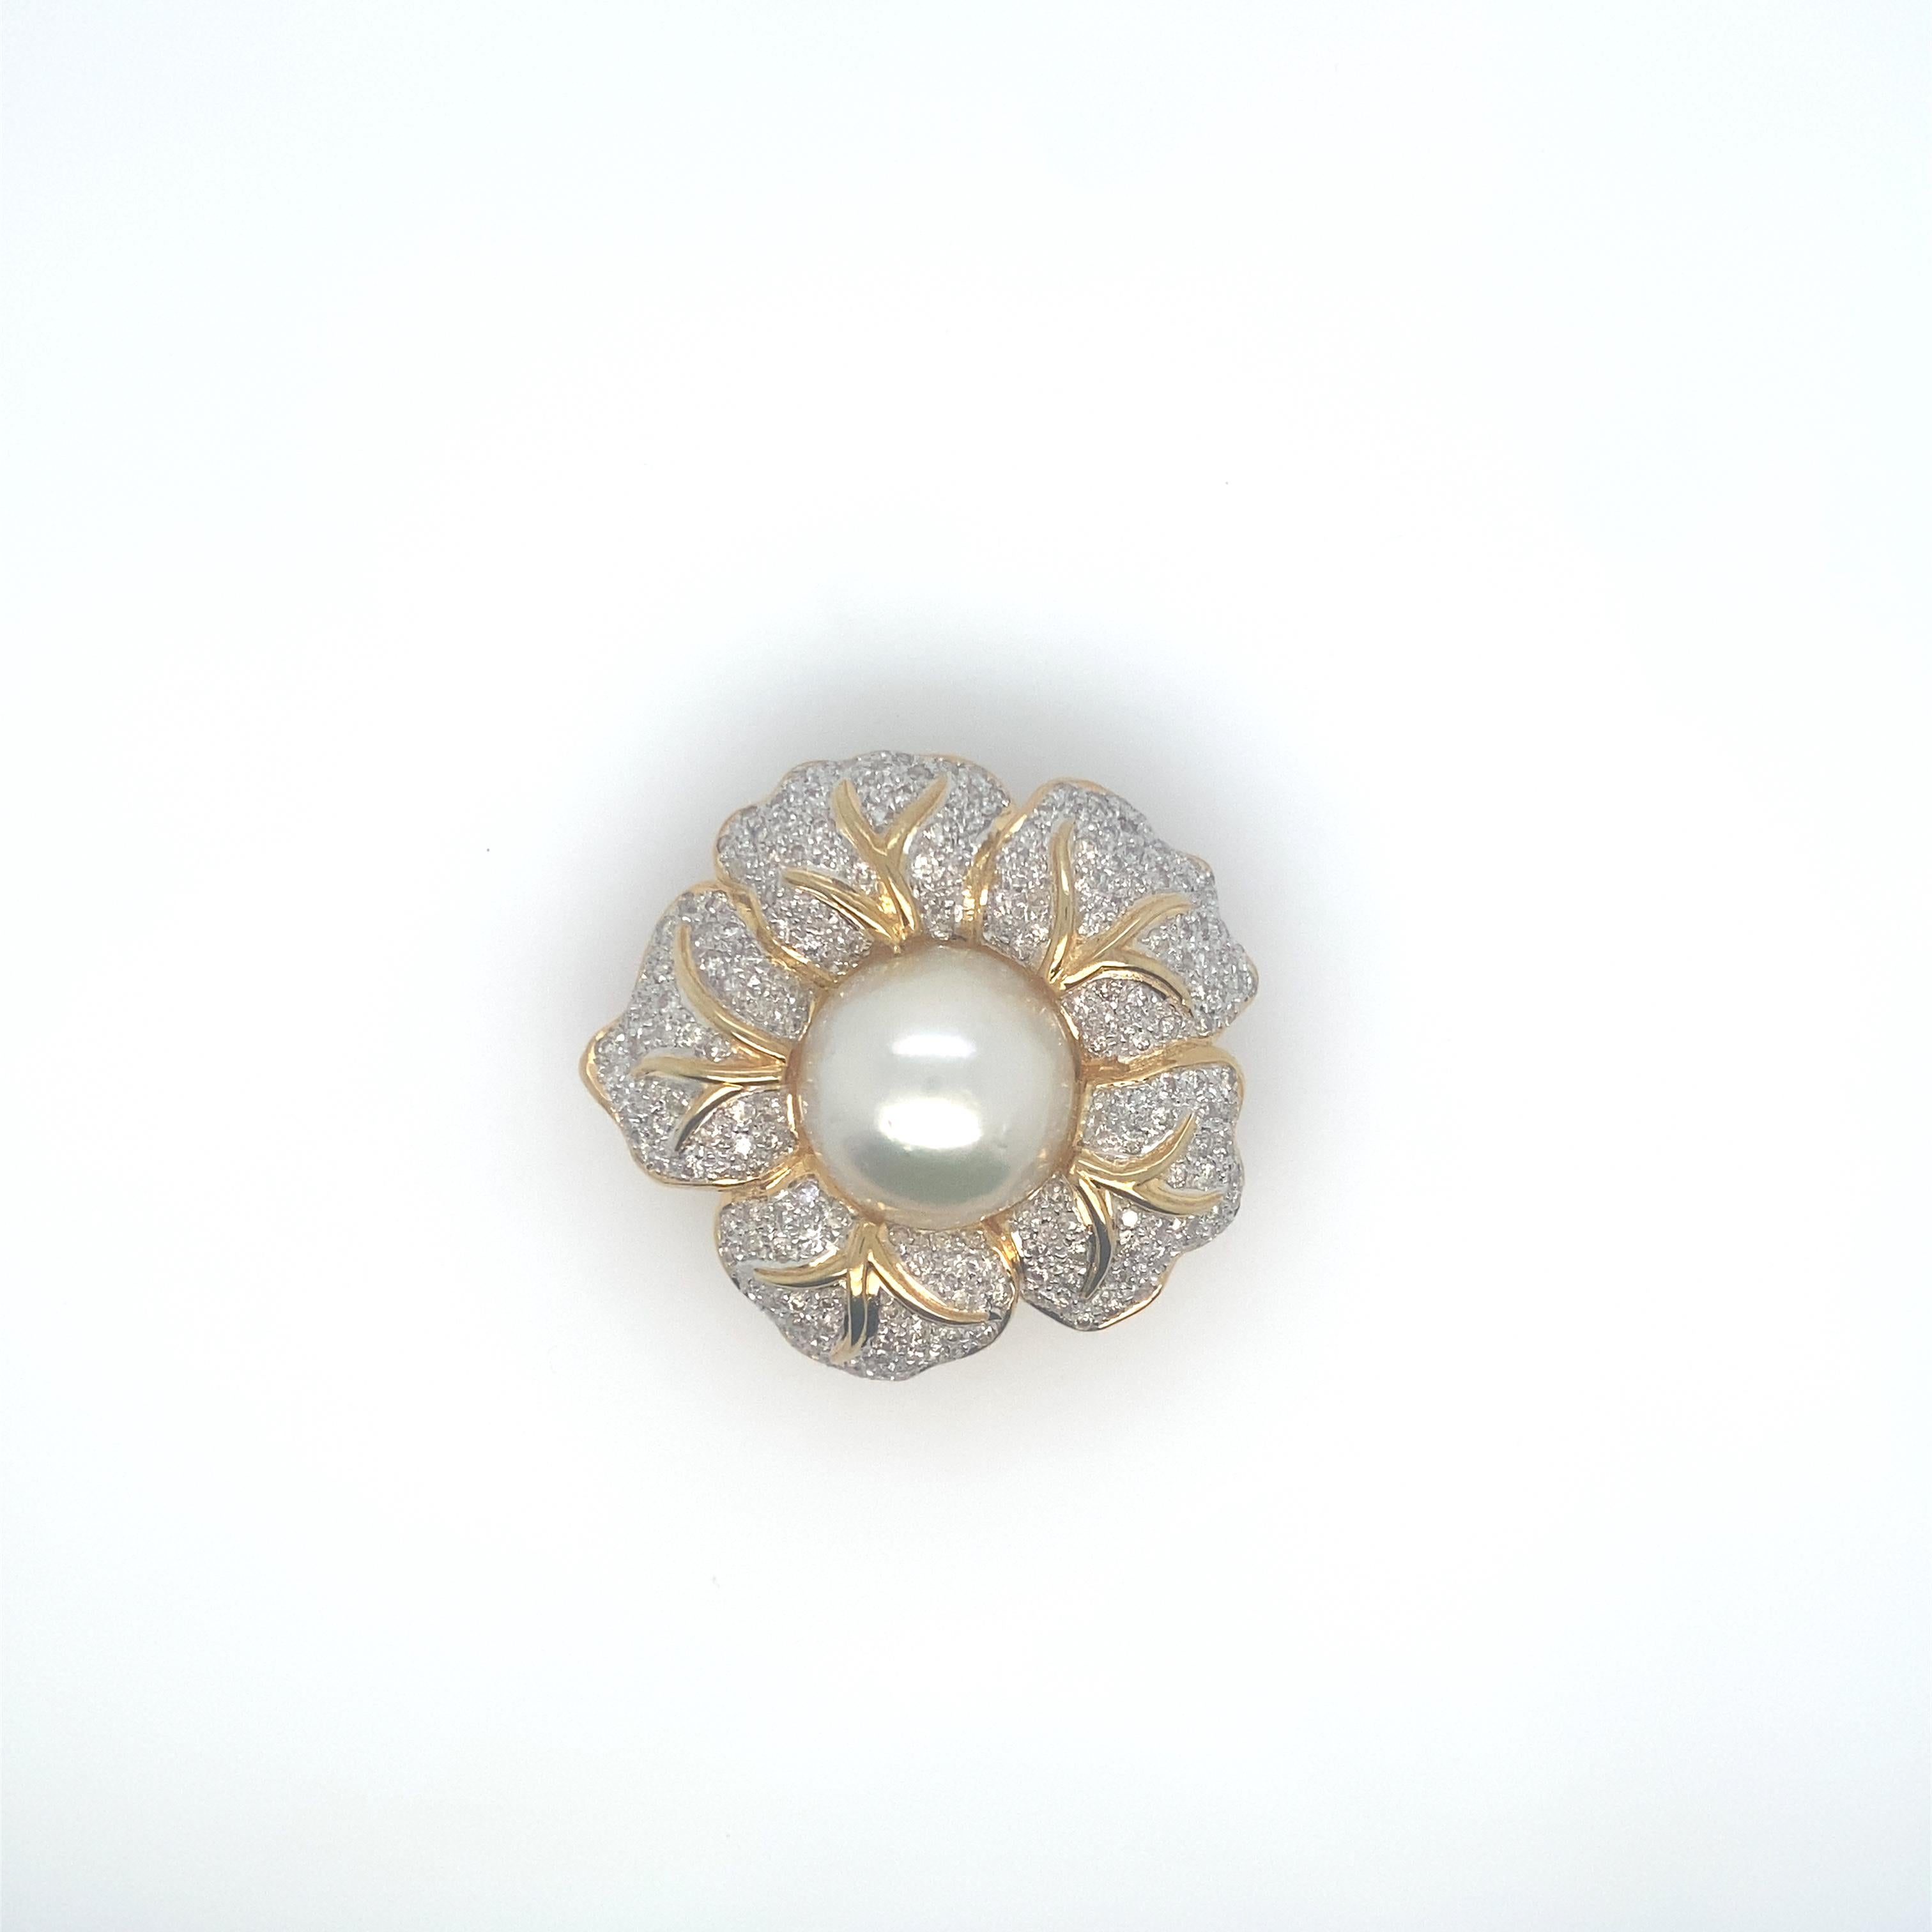 Gorgeous large, rare White South Sea Drop Pearls.  These spectacular pearls measure 14.5mm - 18.35mm.  They are very white color, very high lustre, some blemishes.  The necklace with one of clasps on measures 16